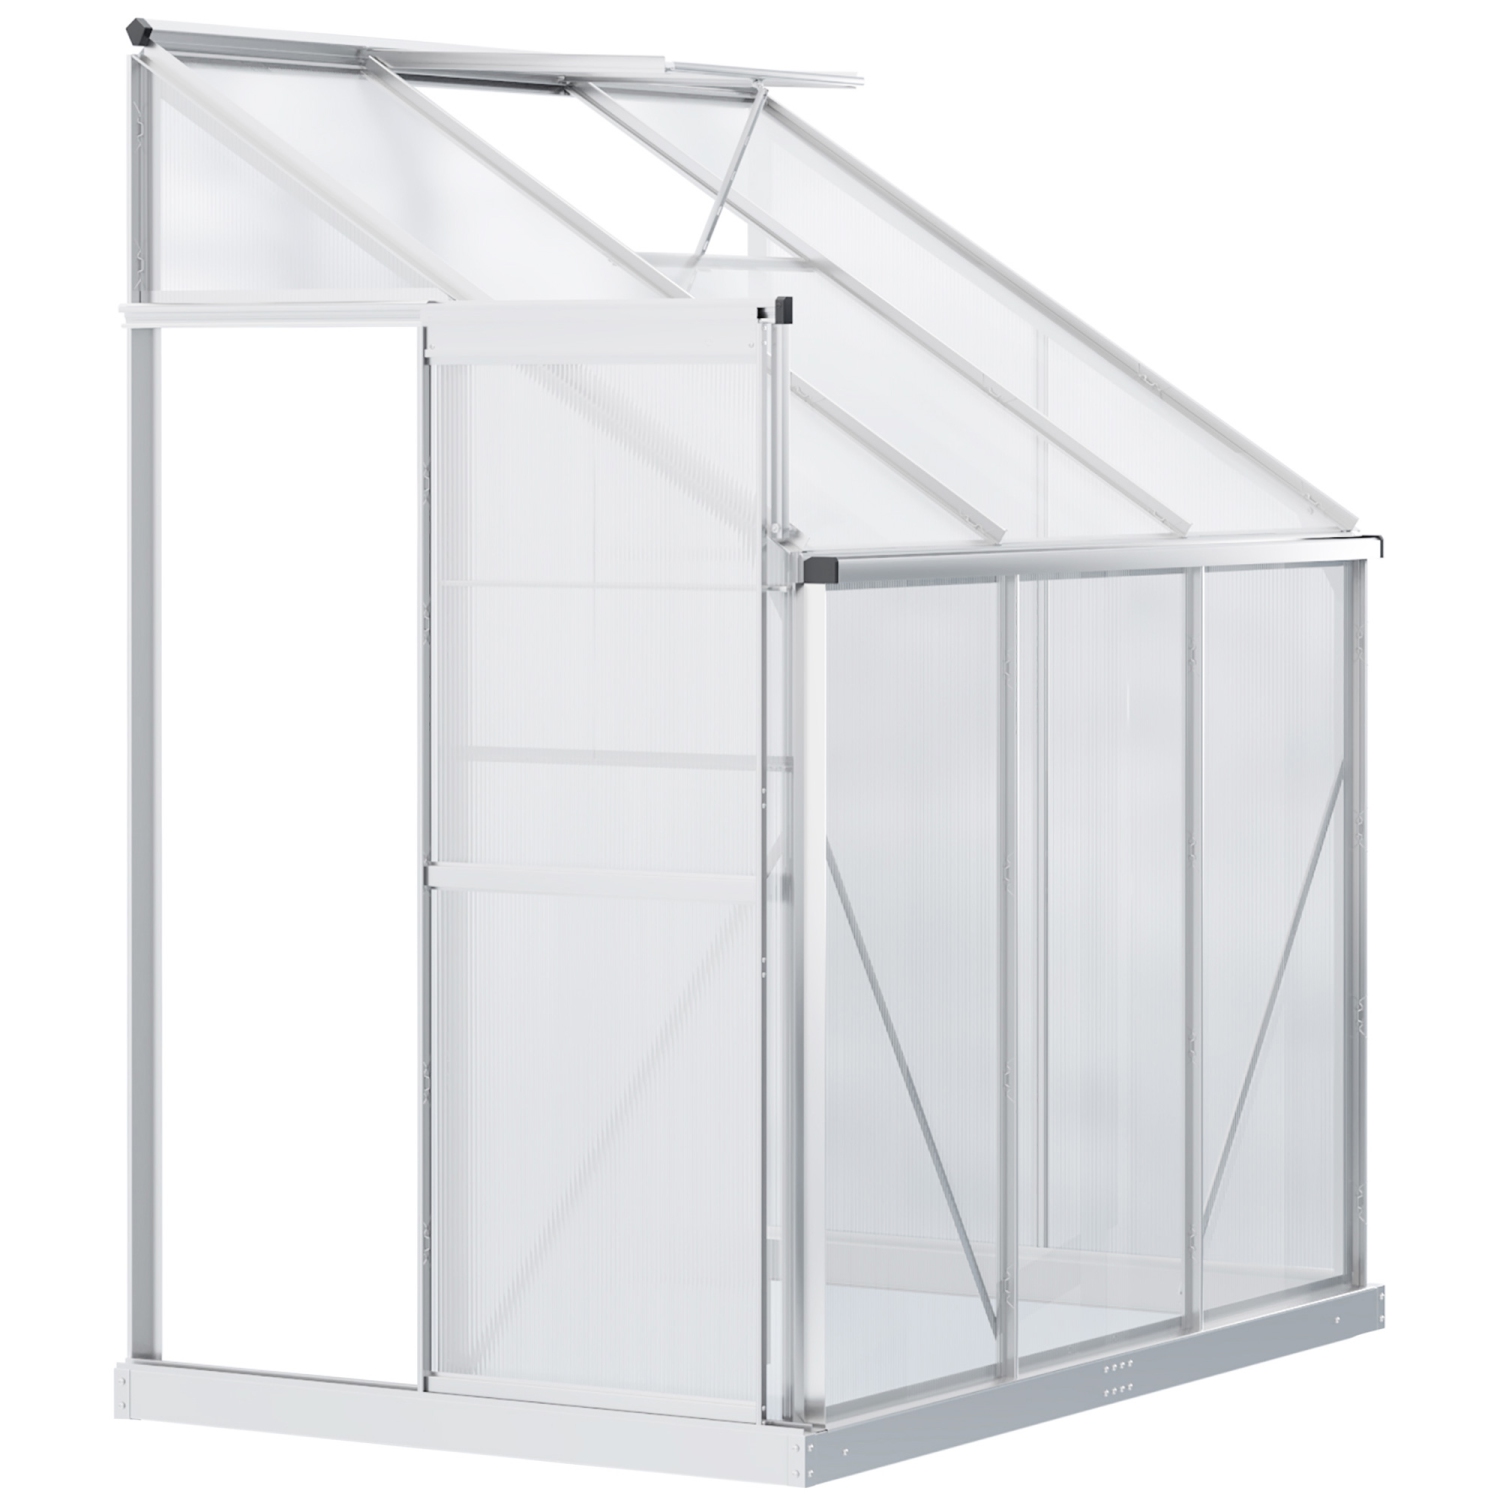 Outsunny 6' x 4' x 7' Lean-to Polycarbonate Greenhouse with Sliding Door and Roof Vent, Walk-in Garden Green House with Aluminium Frame for Plants Herbs Vegetables, Silver